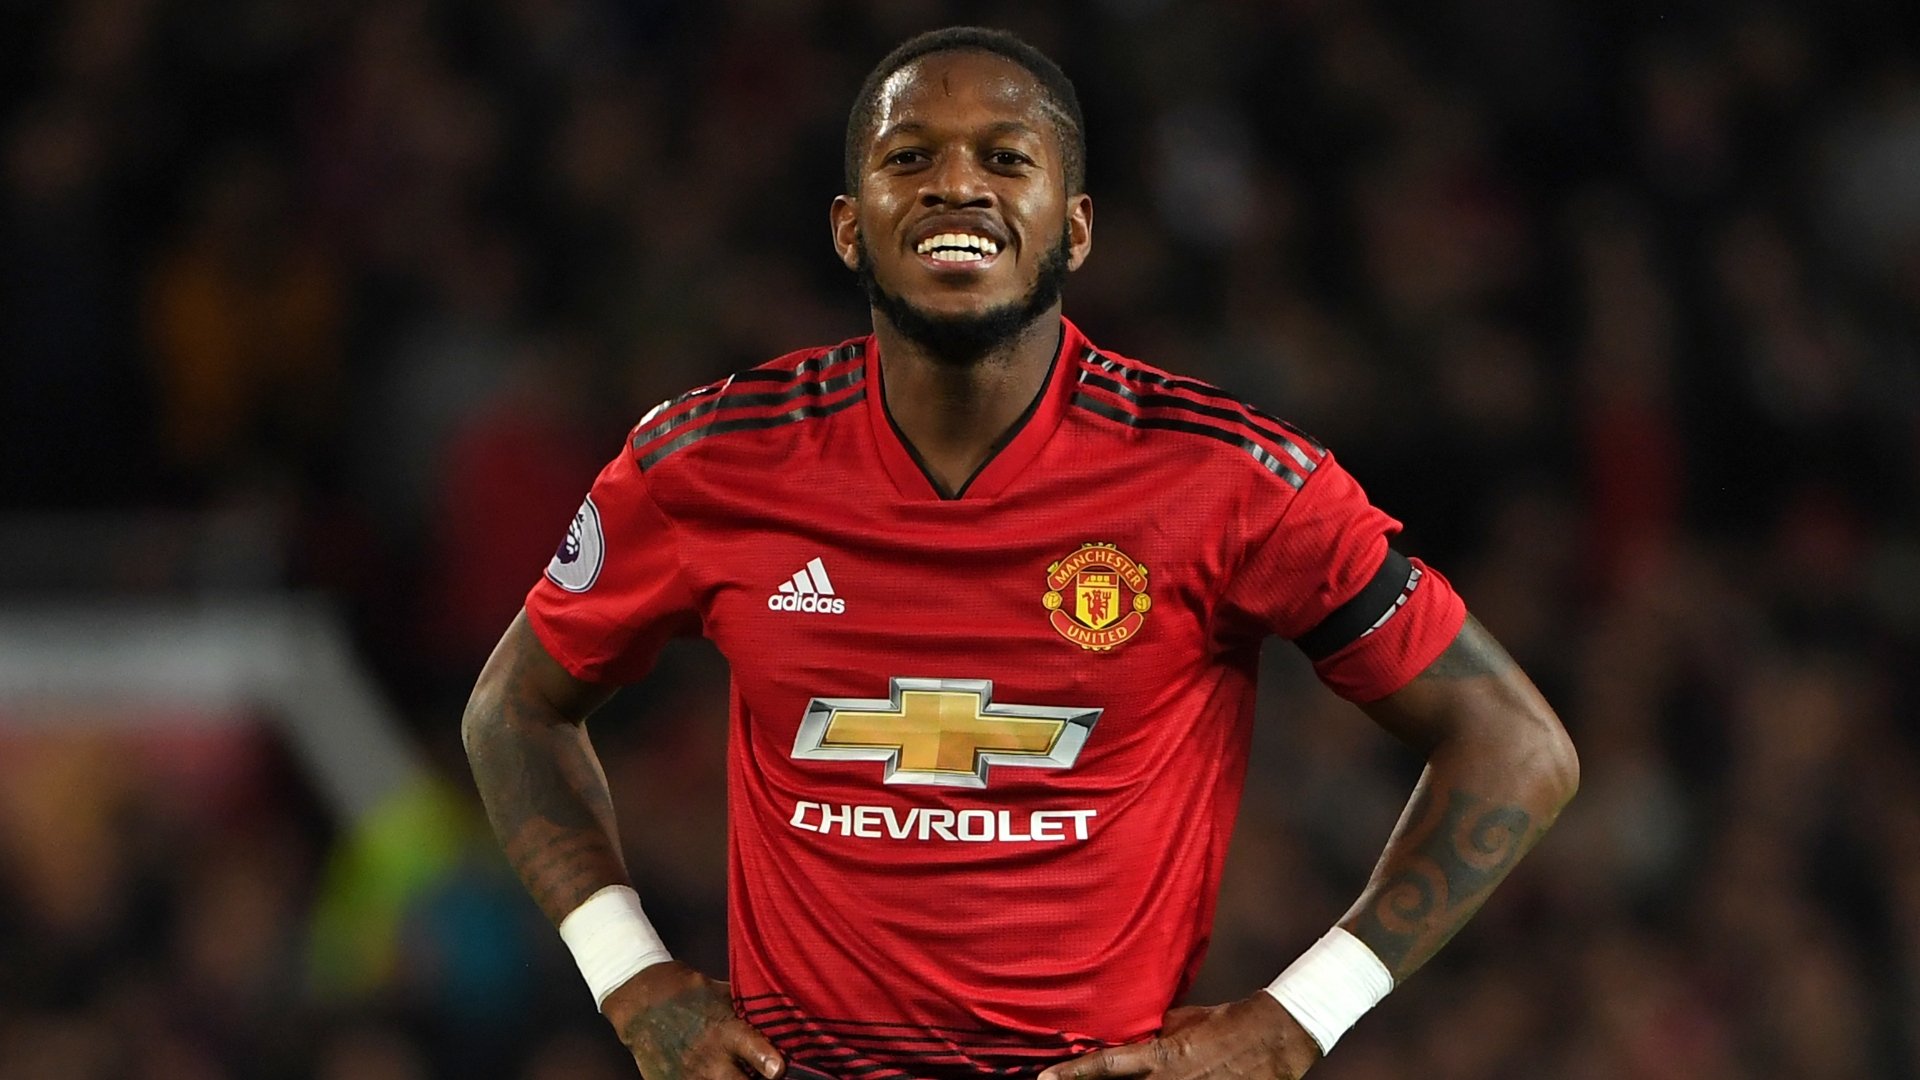 Why isn't Man Utd's £50m summer signing Fred playing?